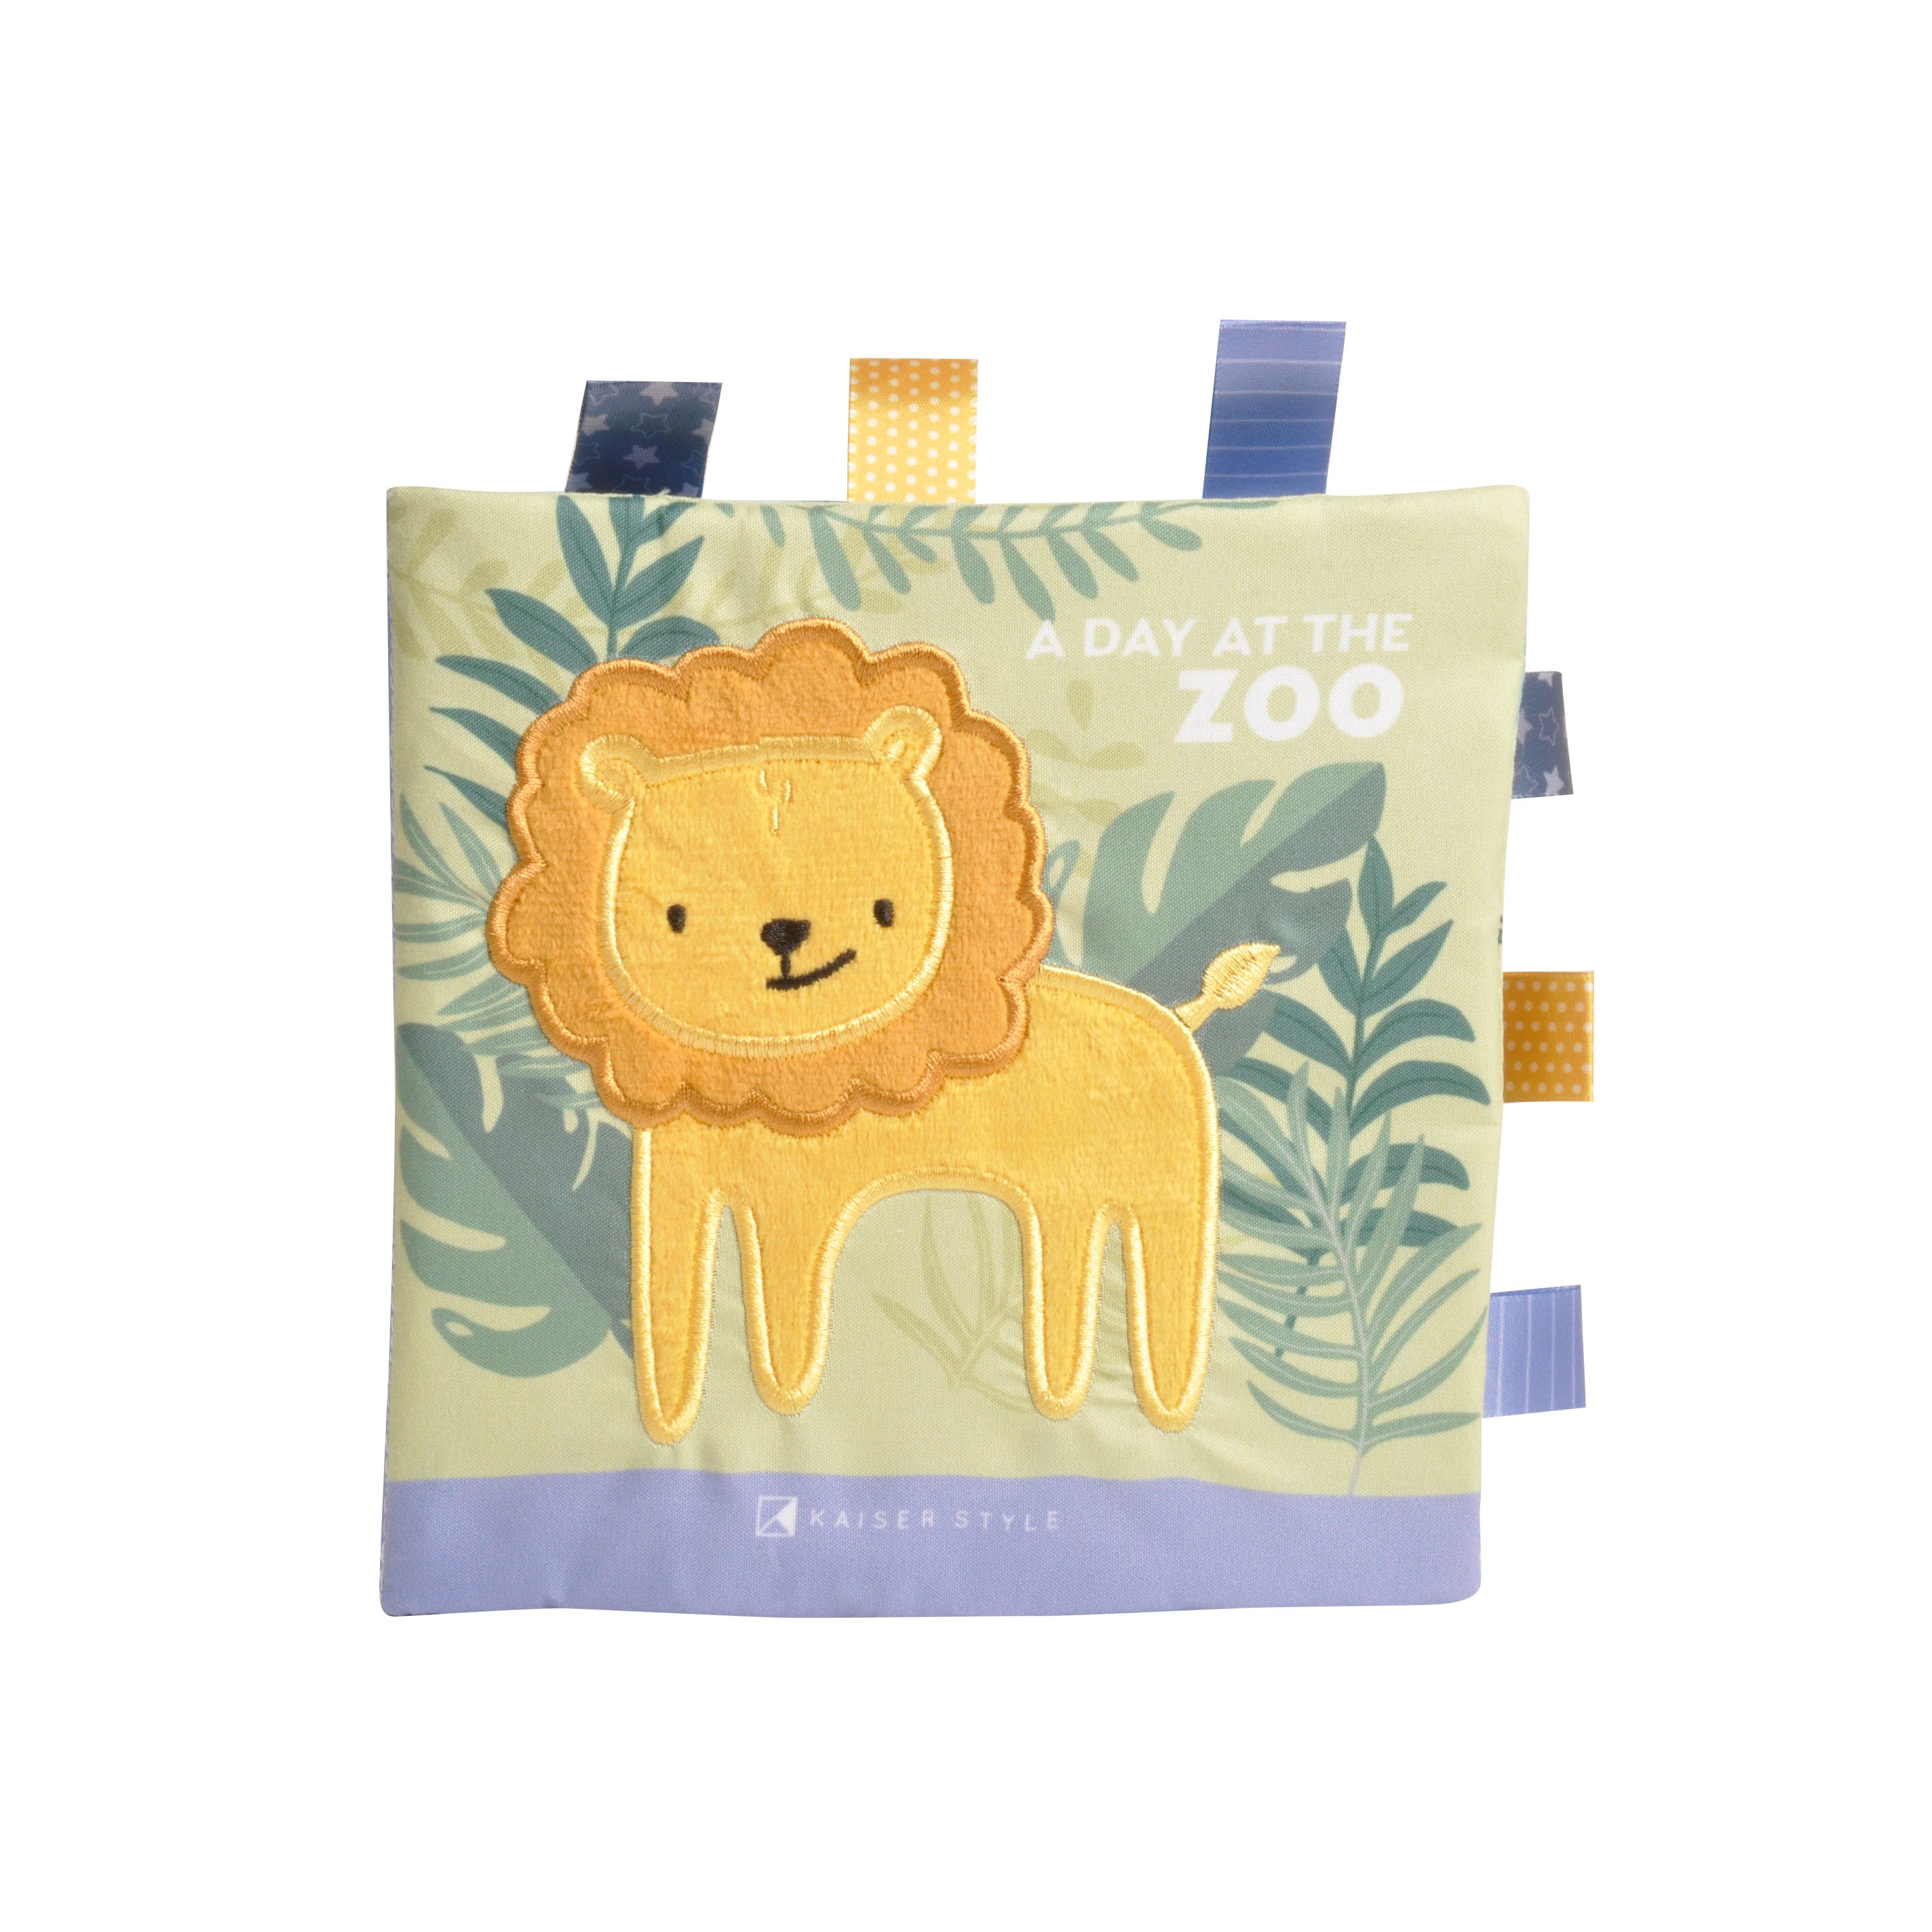 Texture Baby Book - A DAY AT THE ZOO